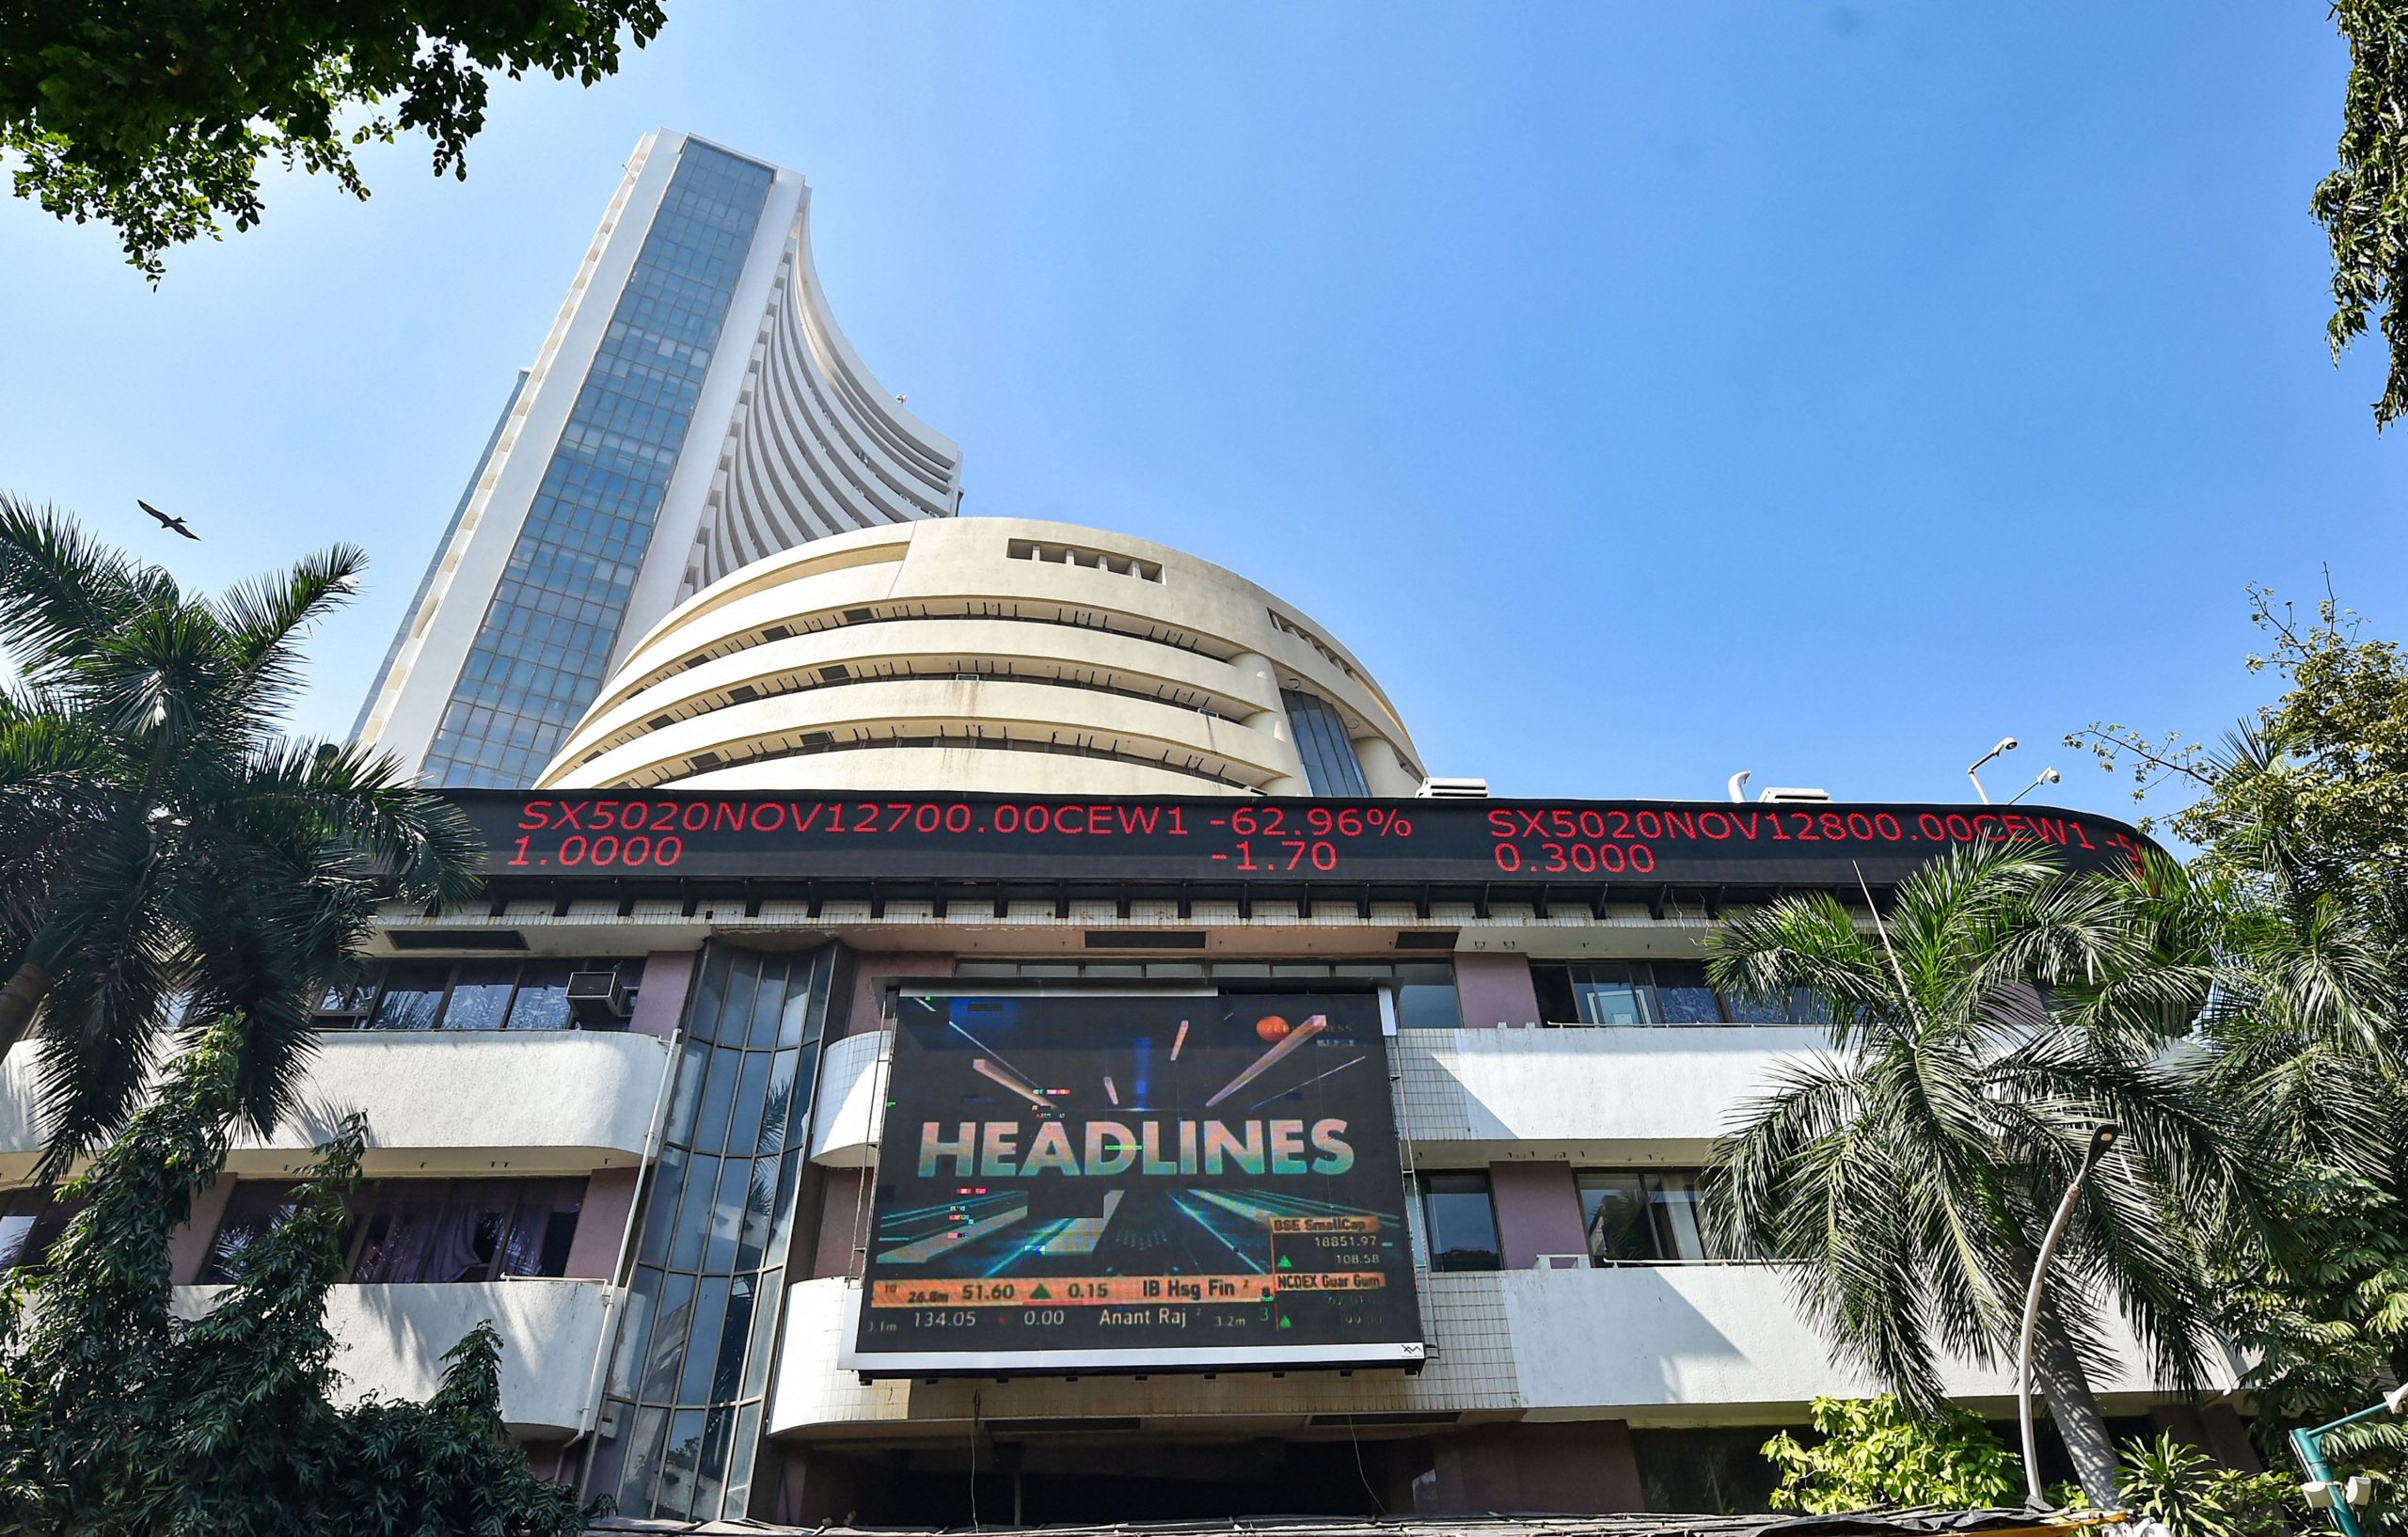 Trending Stocks: LIC, Sun Pharma, IRCTC and others in news today